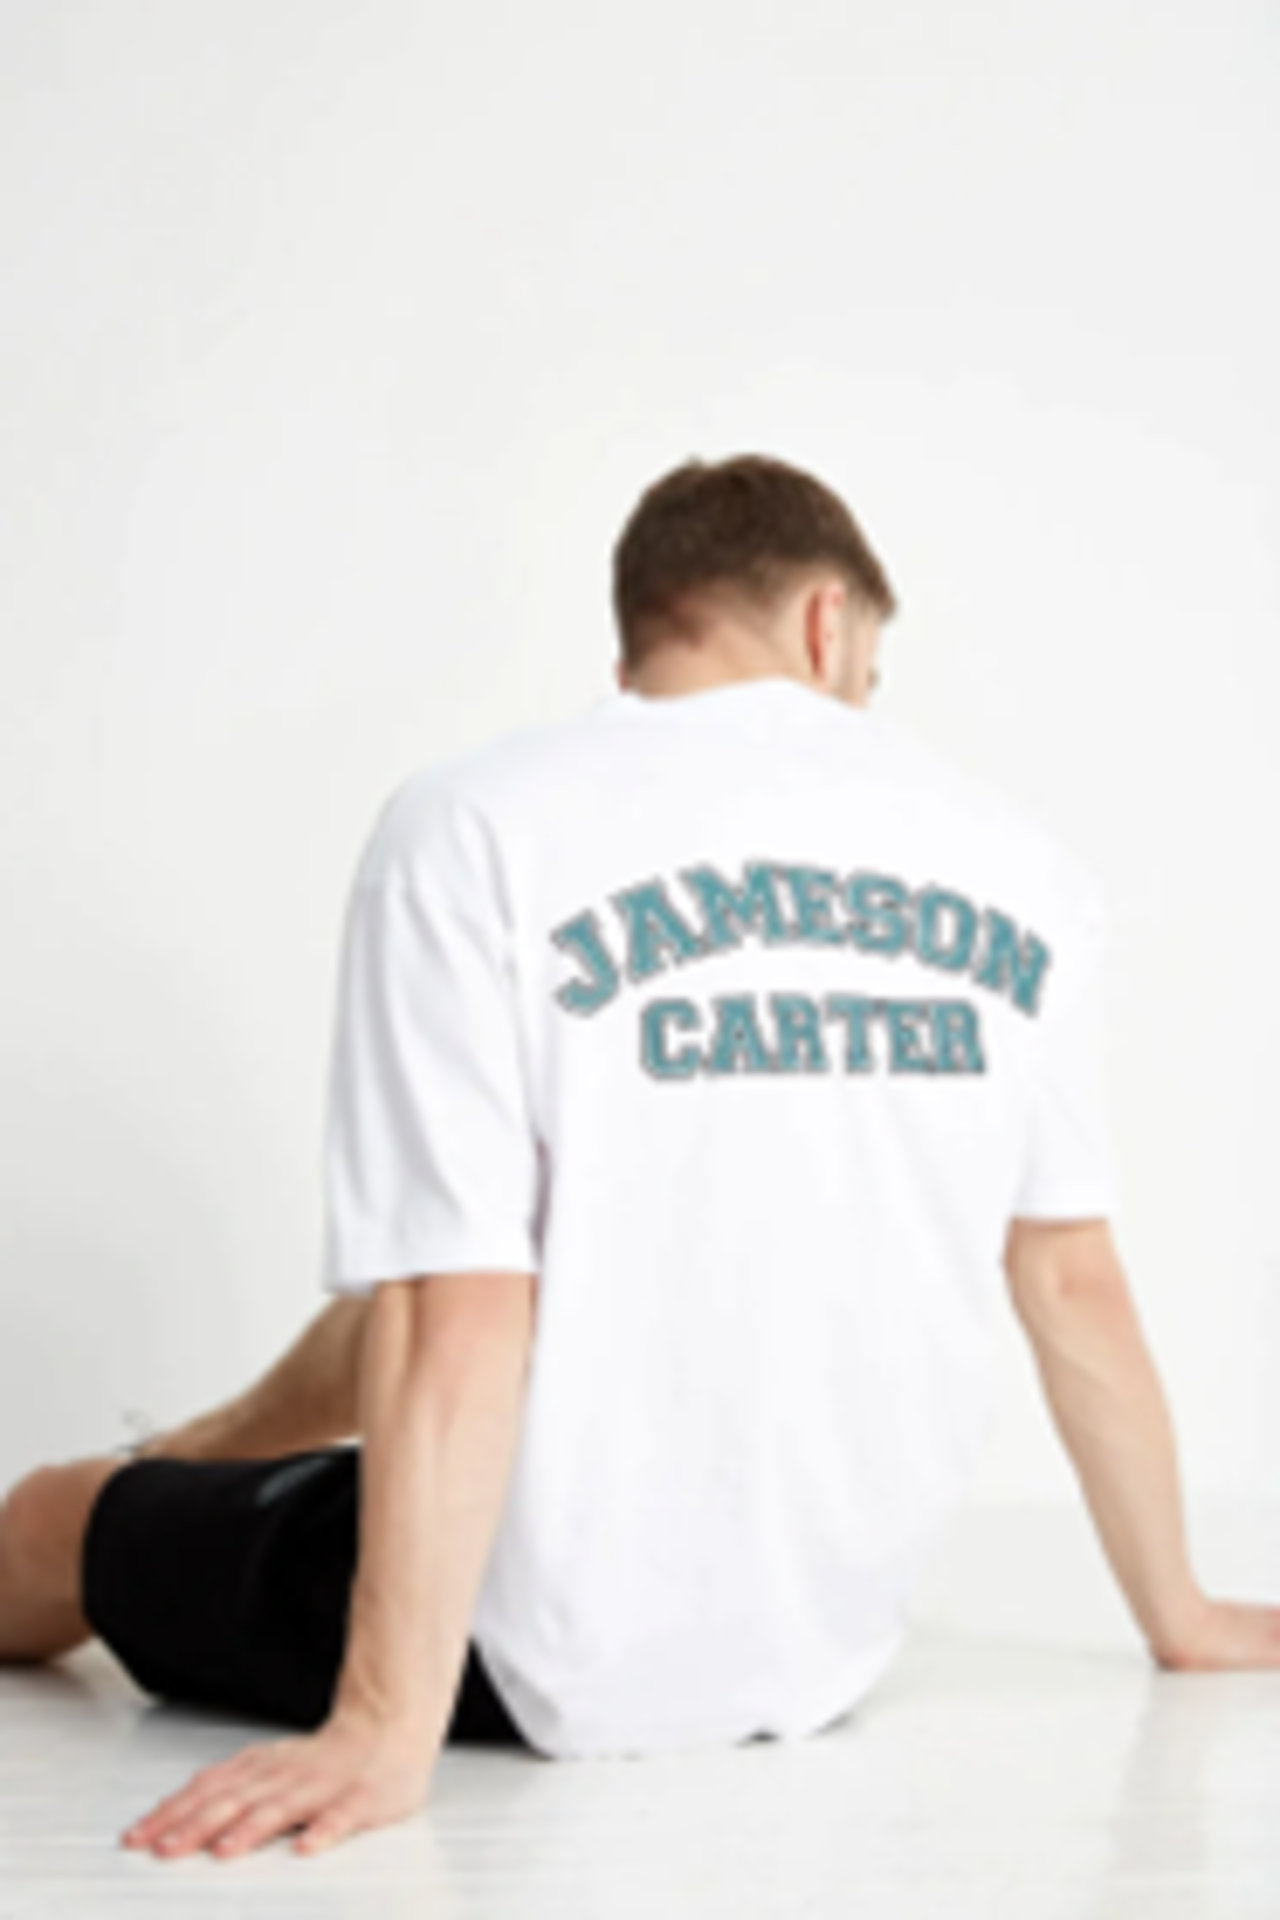 TRADE LOT 100 x NEW MIXED ITEMS OF JAMESON CARTER STOCK. TO INCLUDE ITEMS SUCH AS: JACKETS, - Image 7 of 13